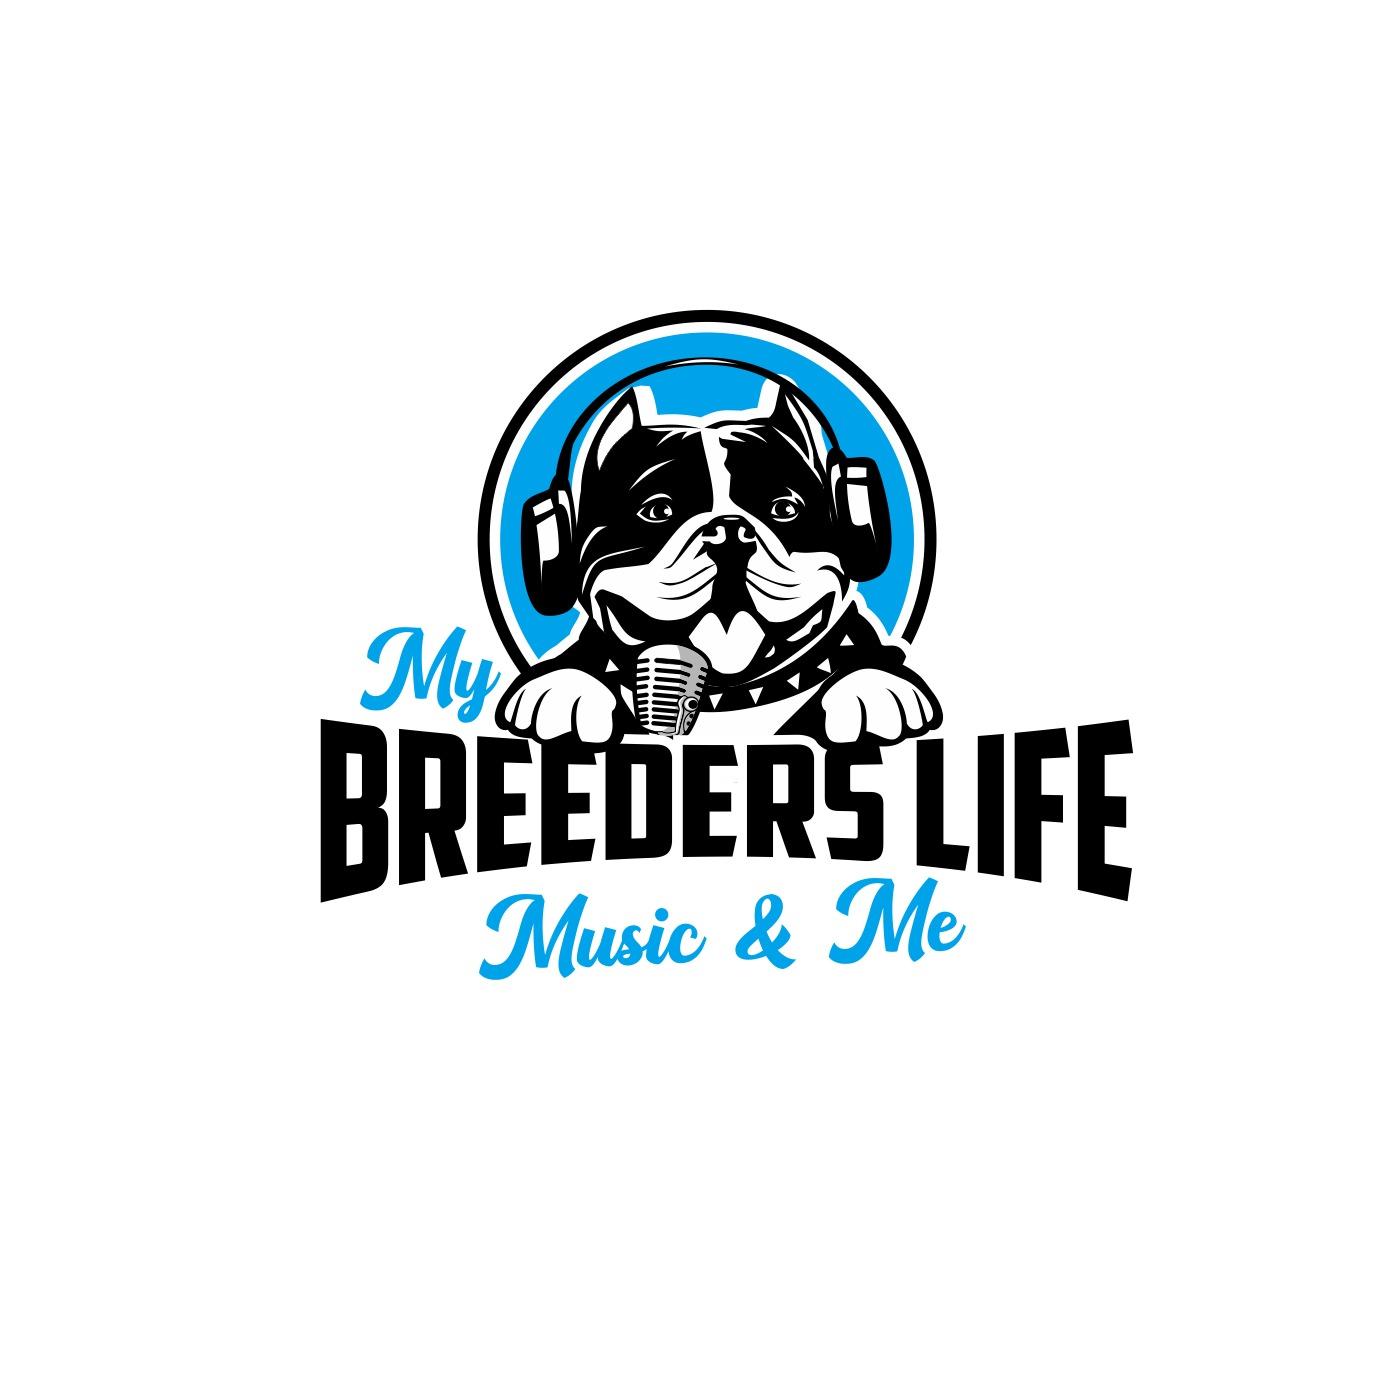 My Breeders life, Music, and Me